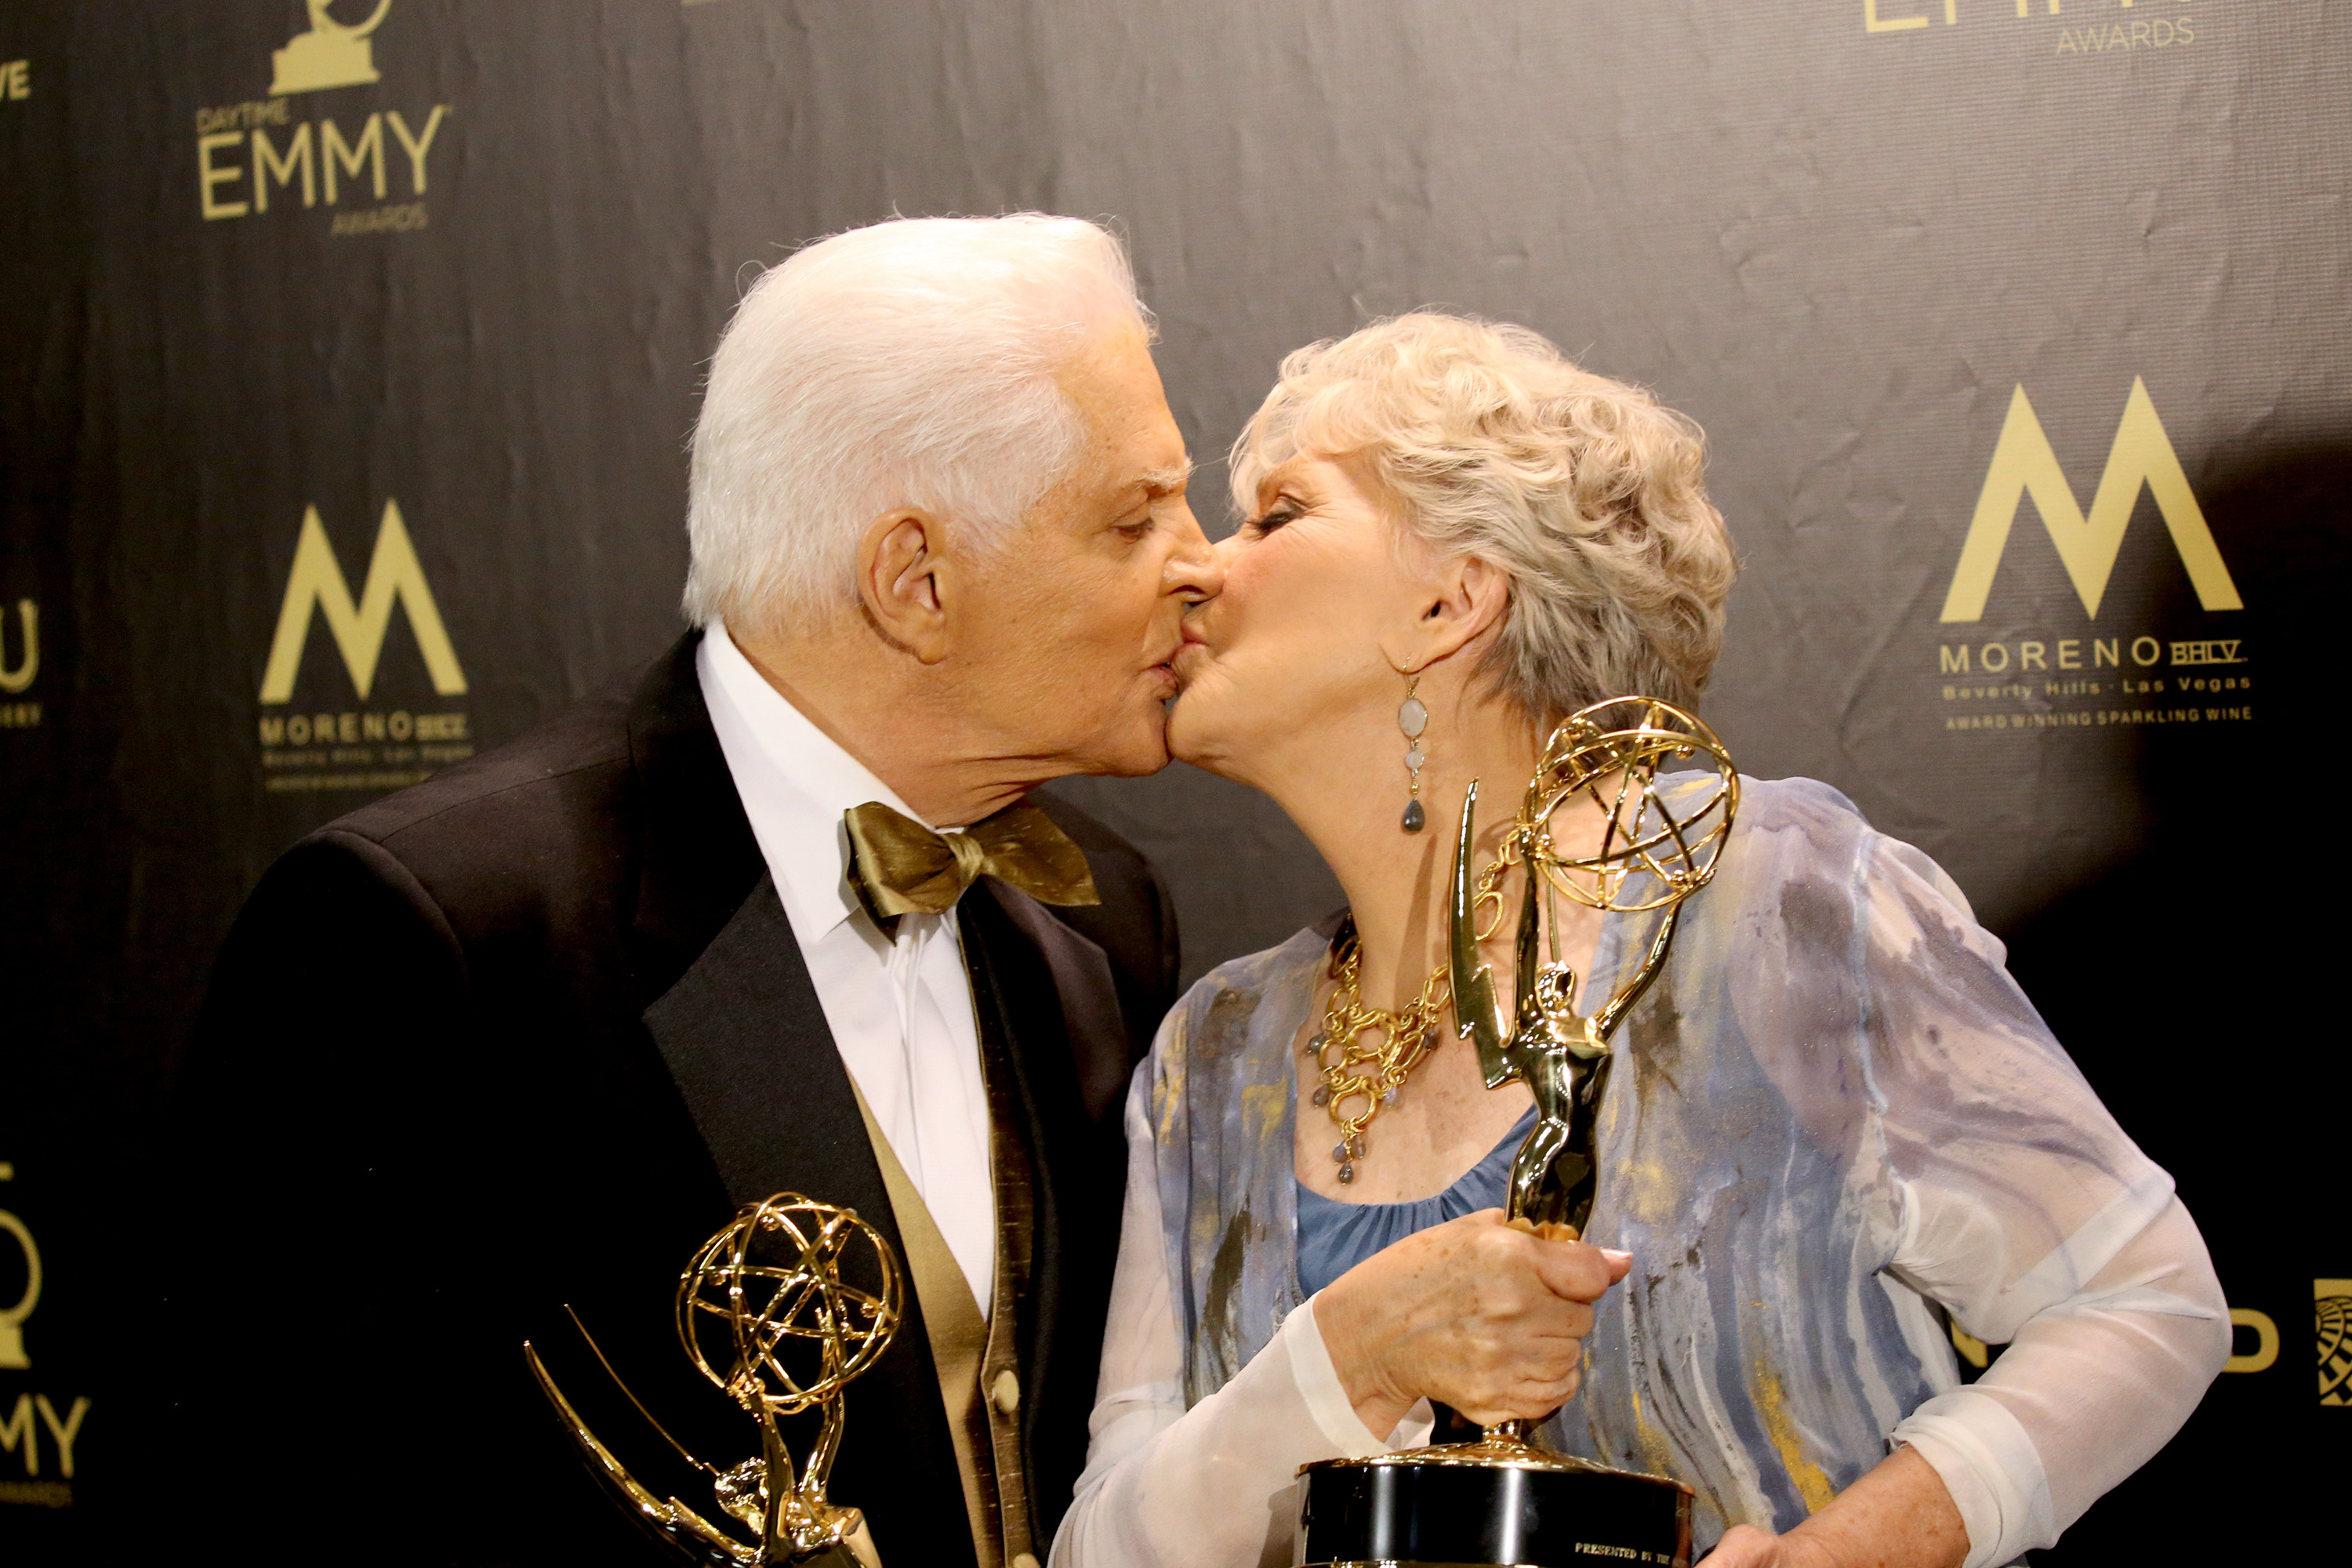 Honorees Bill Hayes and his wife Susan Seaforth Hayes pose with the Lifetime Achievement Award in the press room during the 45th annual Daytime Emmy Awards at Pasadena Civic Auditorium on April 29, 2018 in Pasadena, California | Source: Getty Images